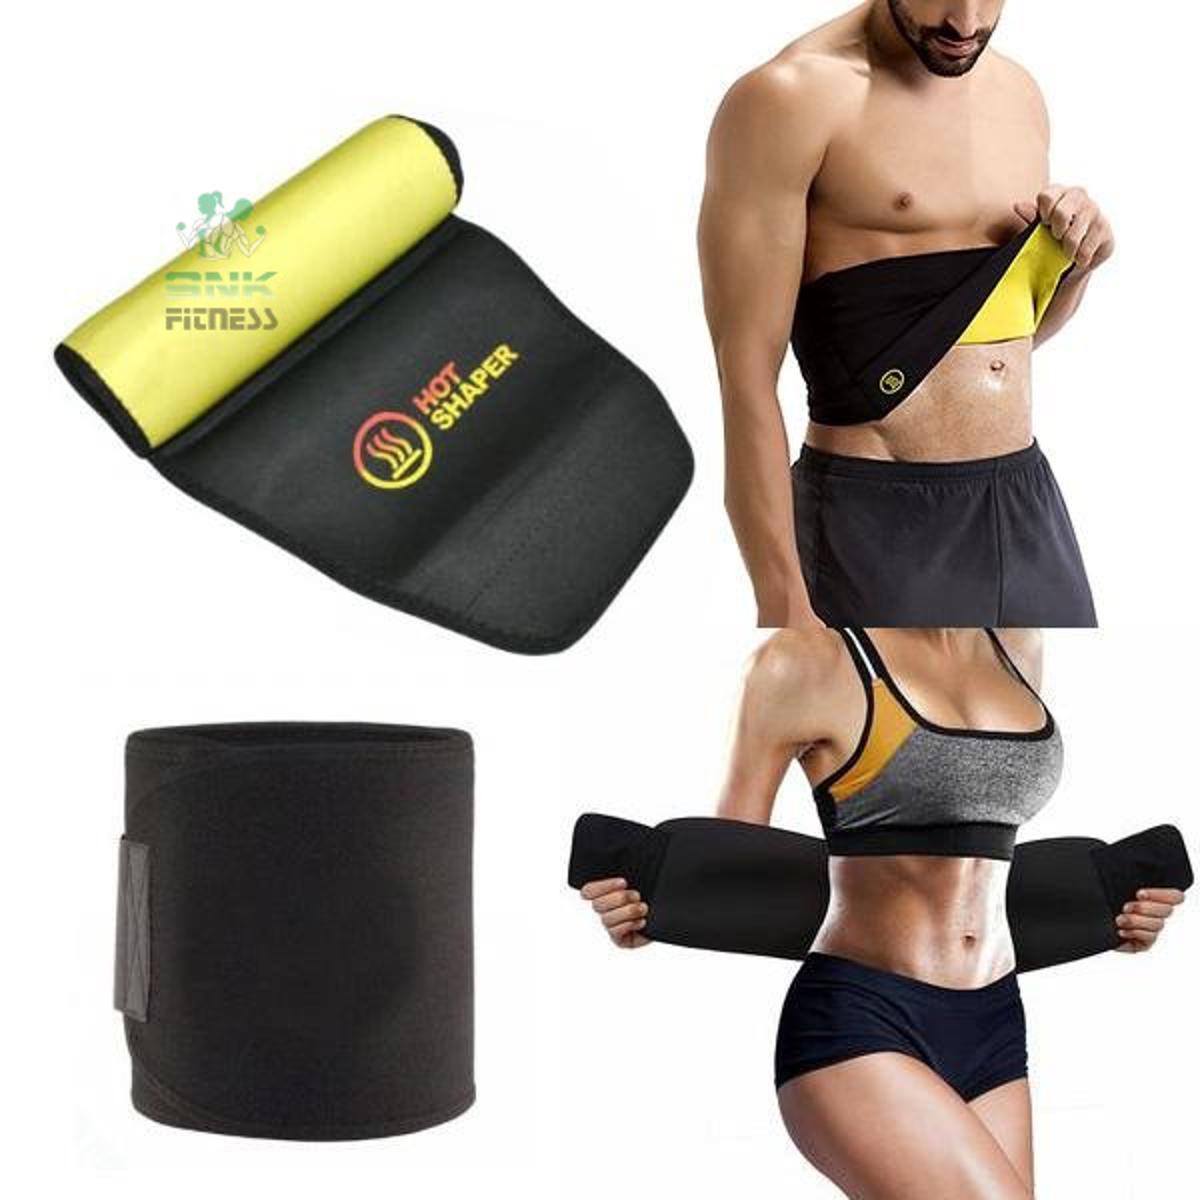 Unisex Hot Shapers Slimming Belt, Free Size - ONE SIZE FIT ALL